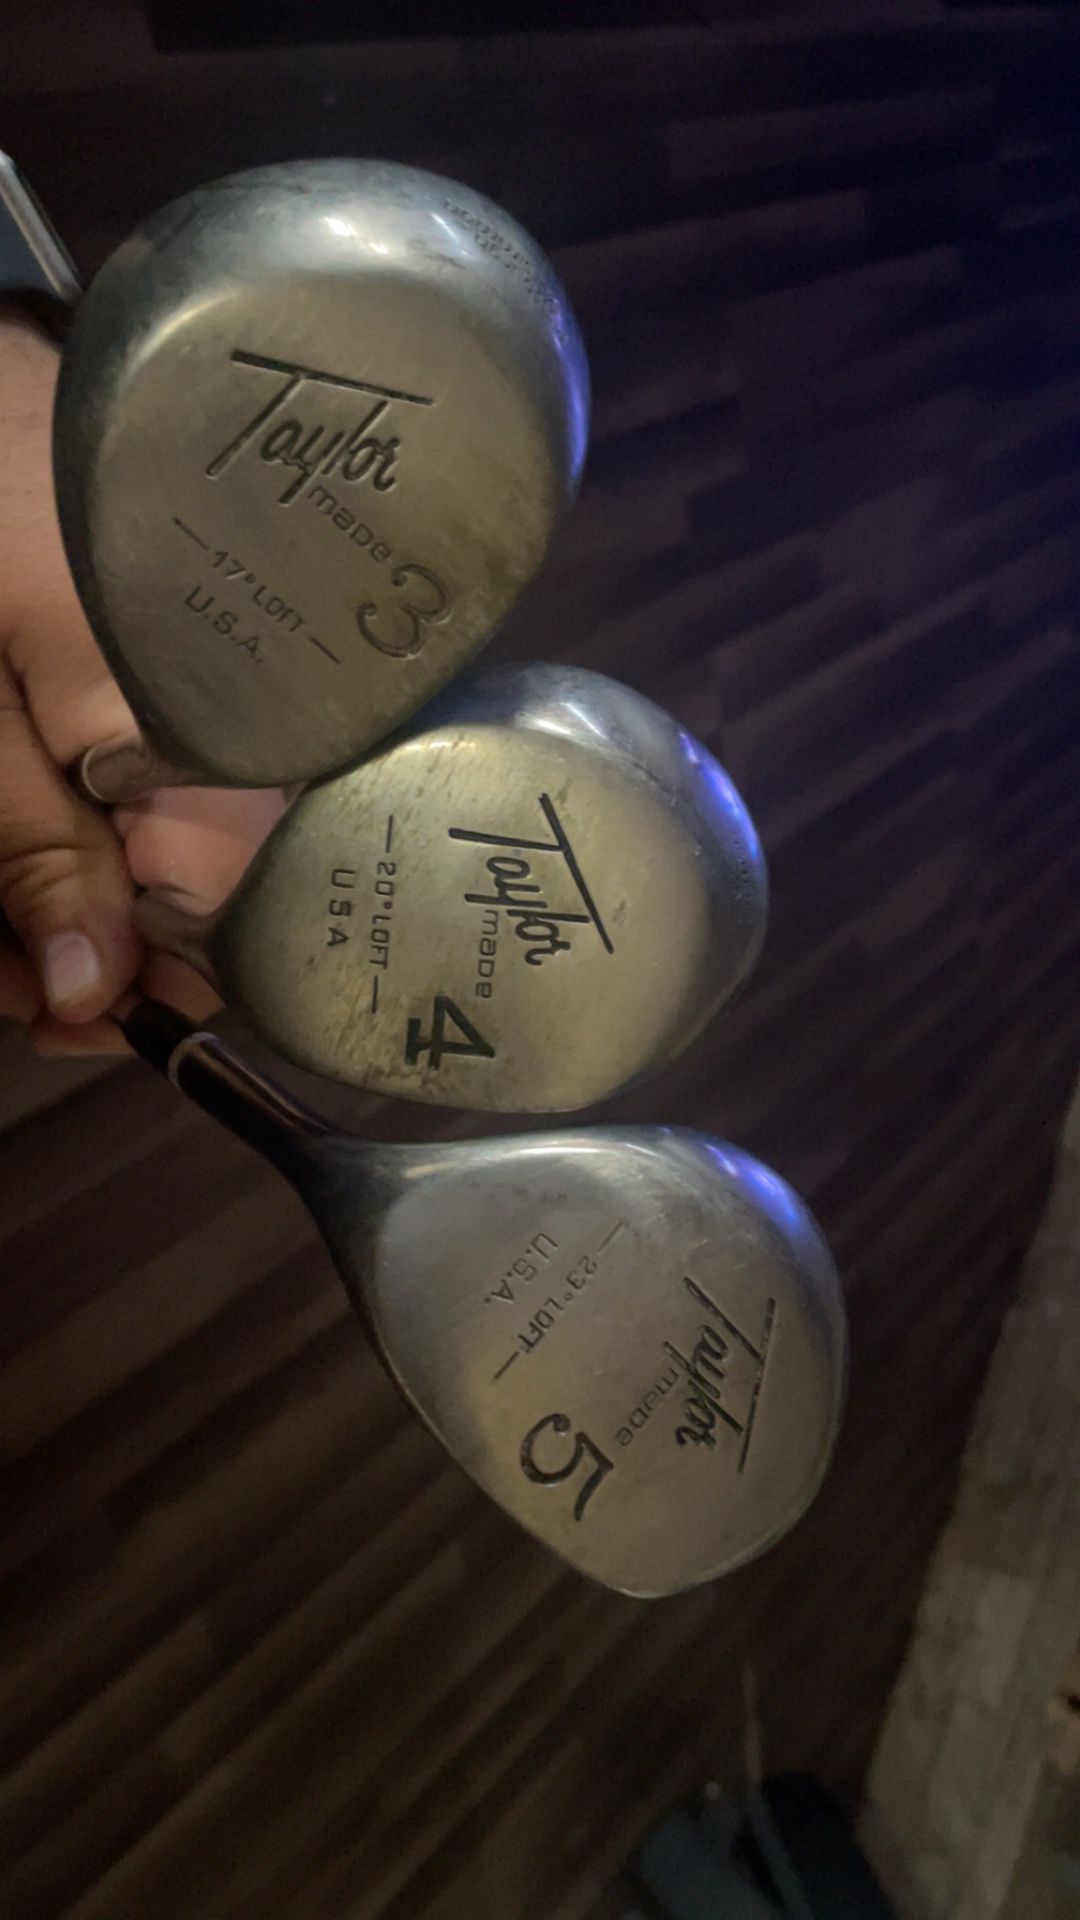 Taylor Made Golf Clubs